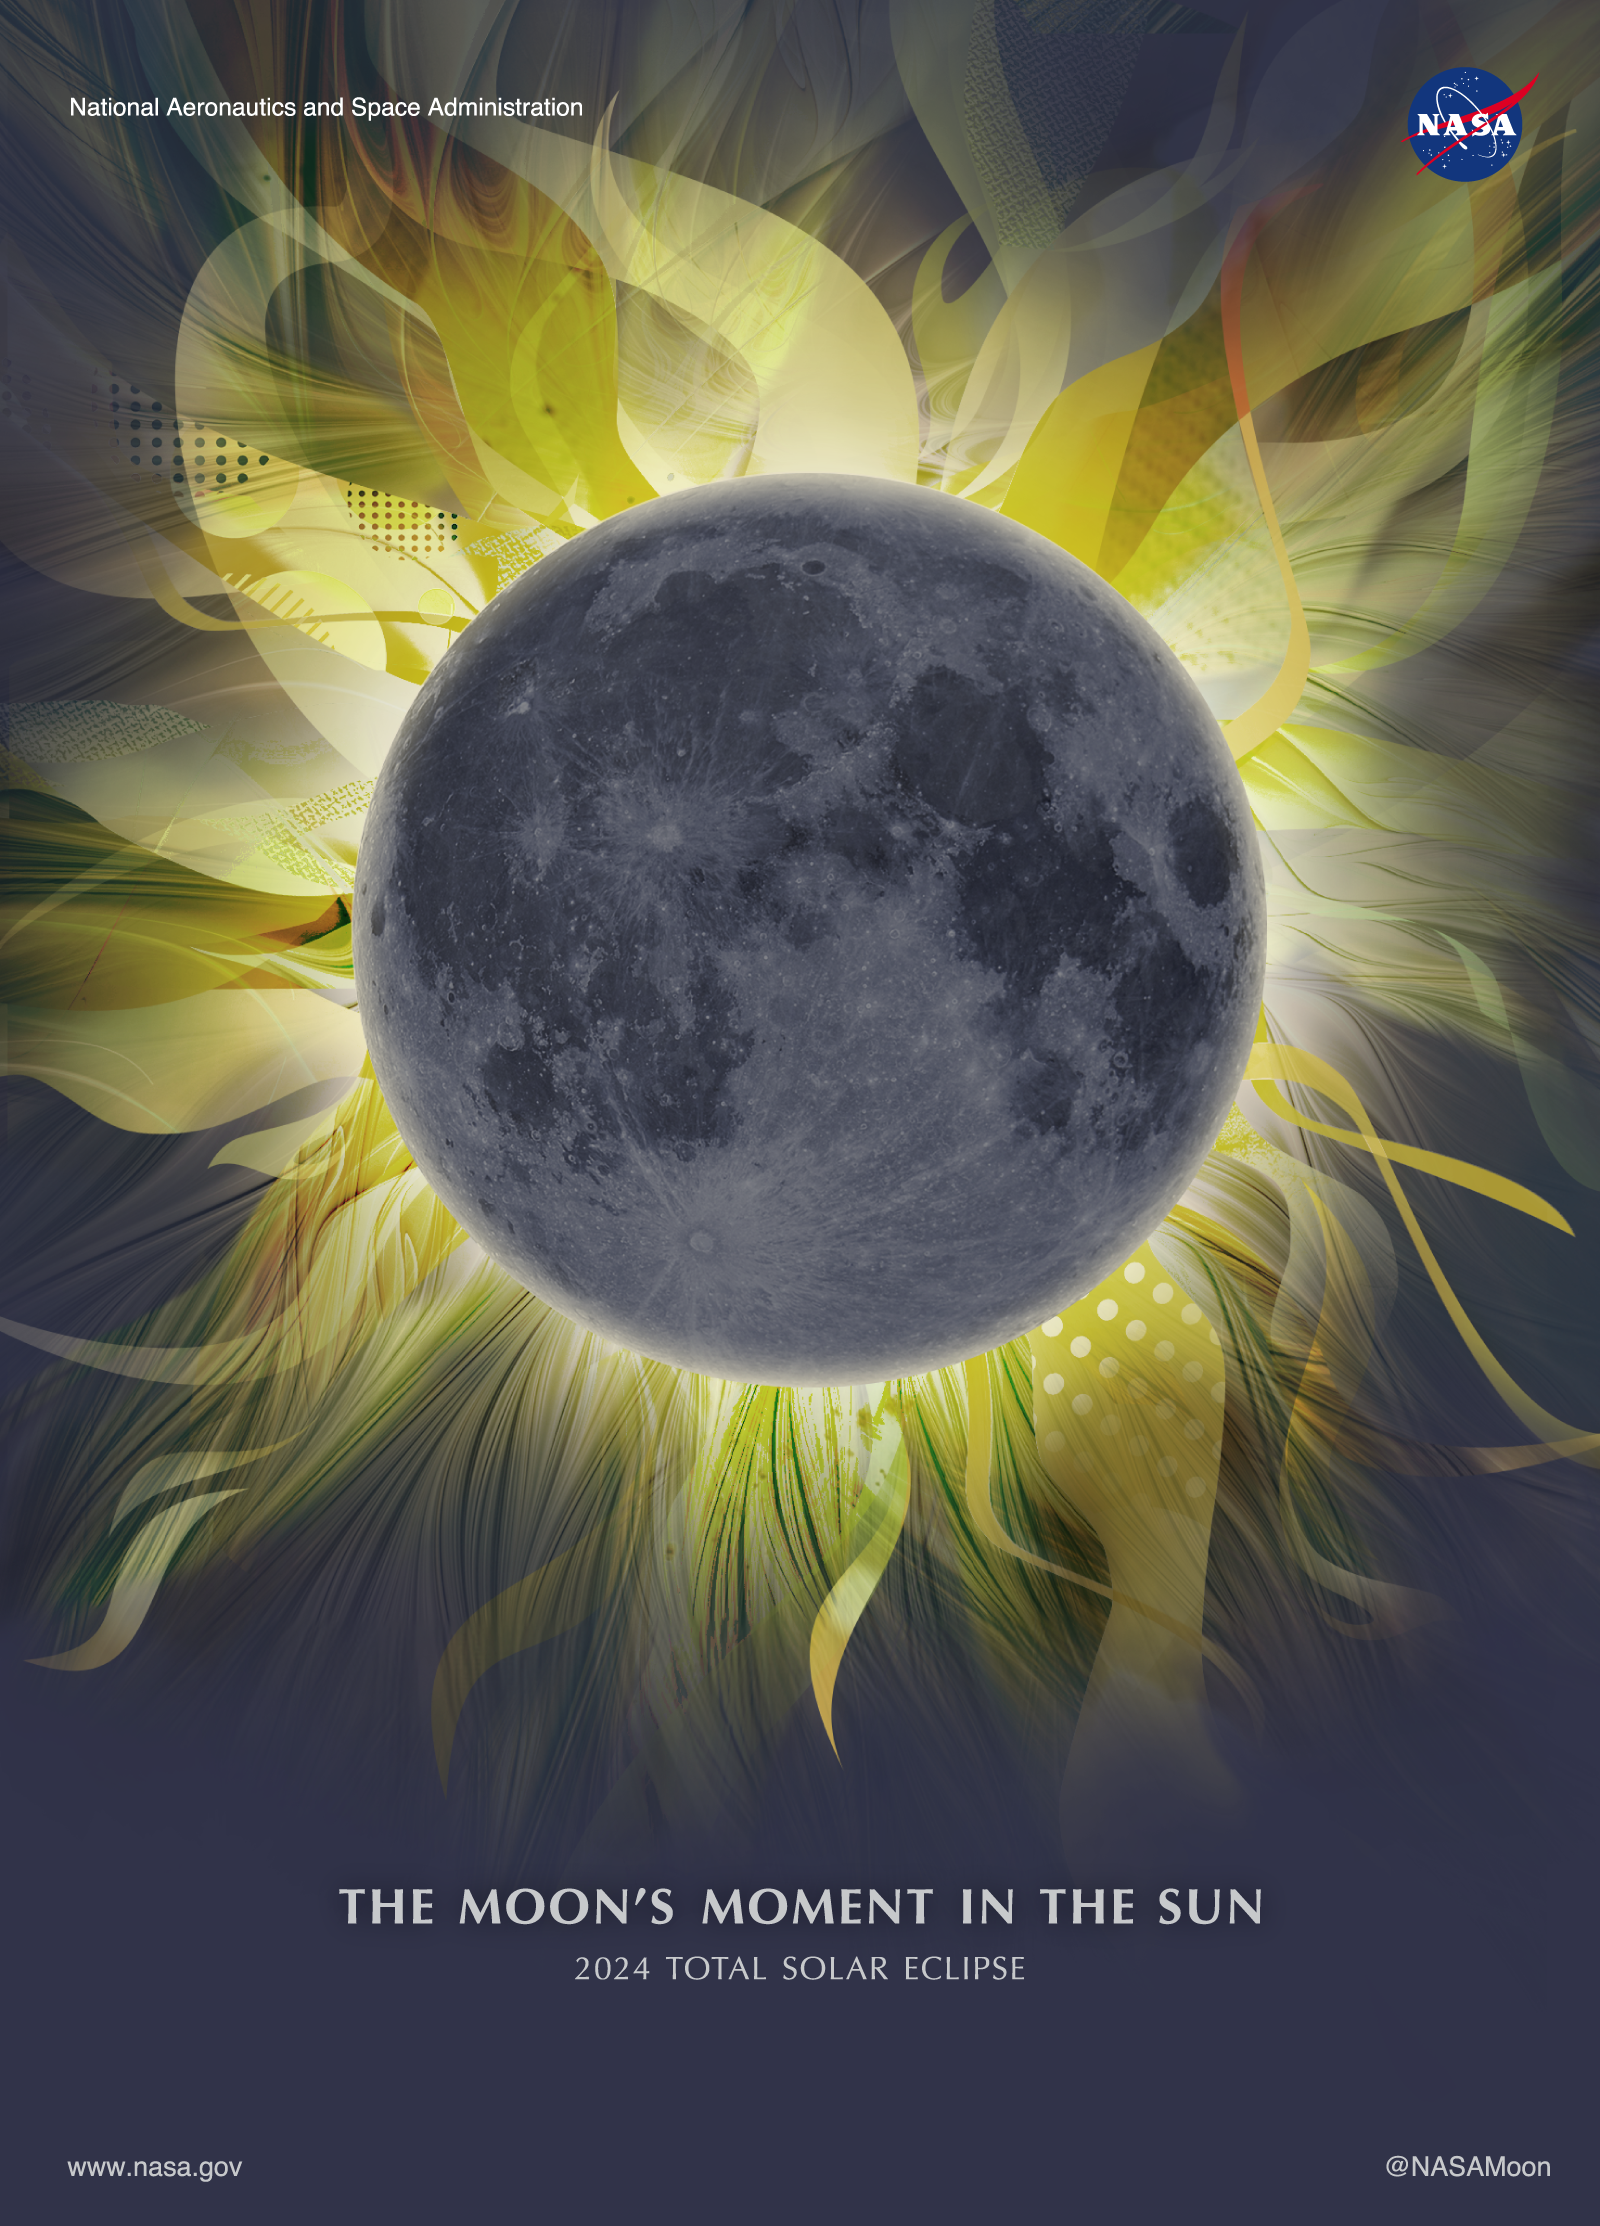 This stylized illustration, created for the 2024 total solar eclipse, shows Earth’s Moon blocking the Sun from view and revealing the Sun’s corona, or outermost atmosphere. The Sun’s magnetic field affects charged particles in the corona, causing elaborate streamers and plumes that are depicted in this artist’s interpretation.